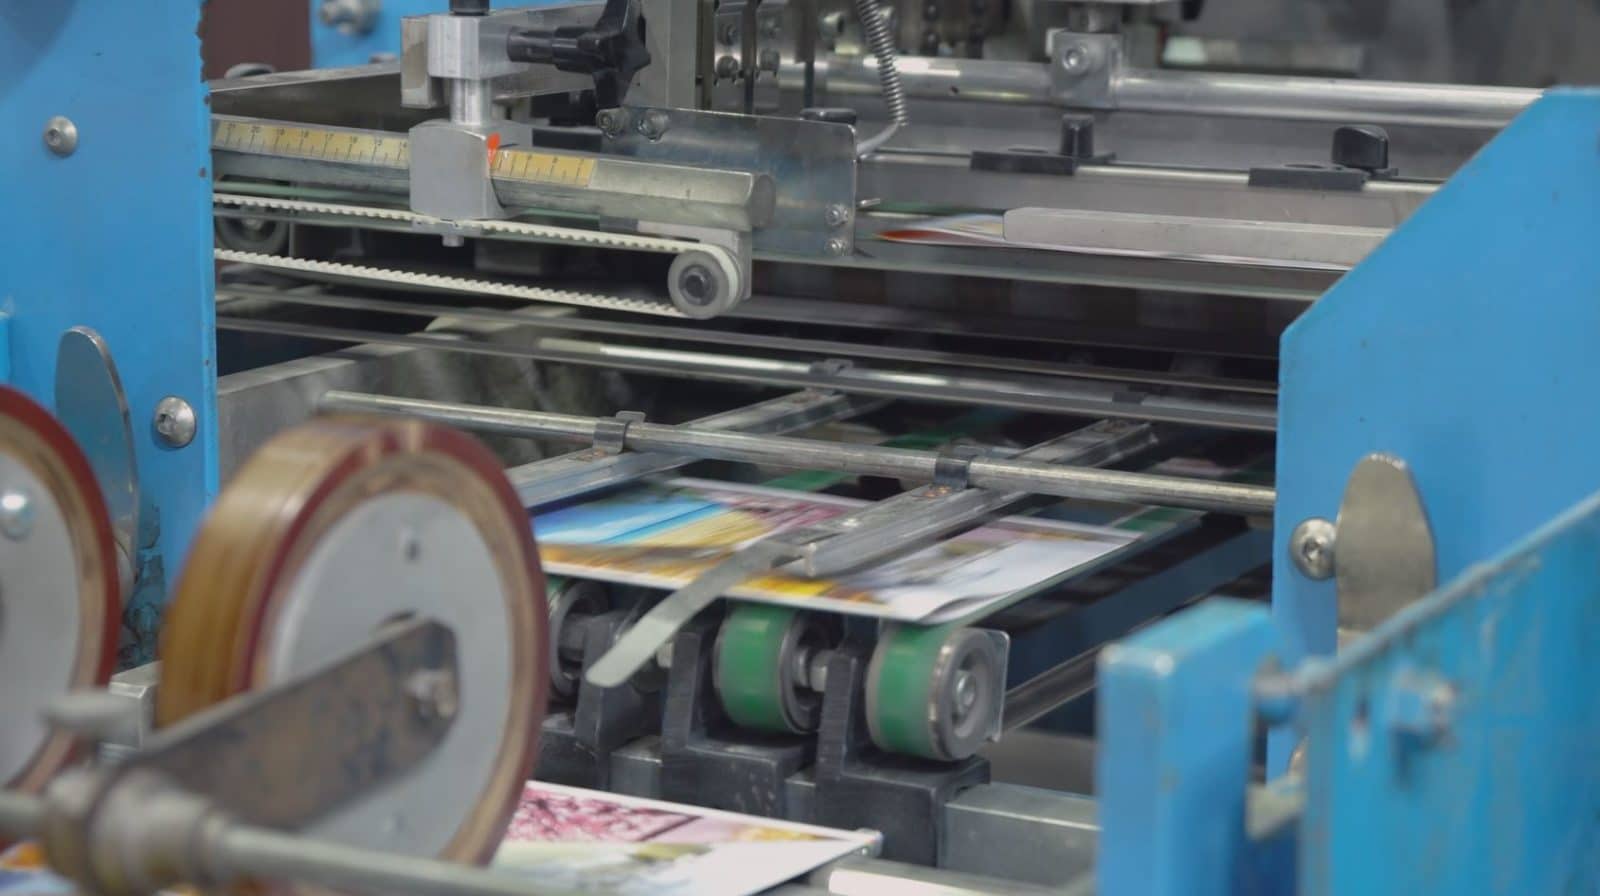 Hong Kong Print Shops — How much does it cost to print brochures in 2022?